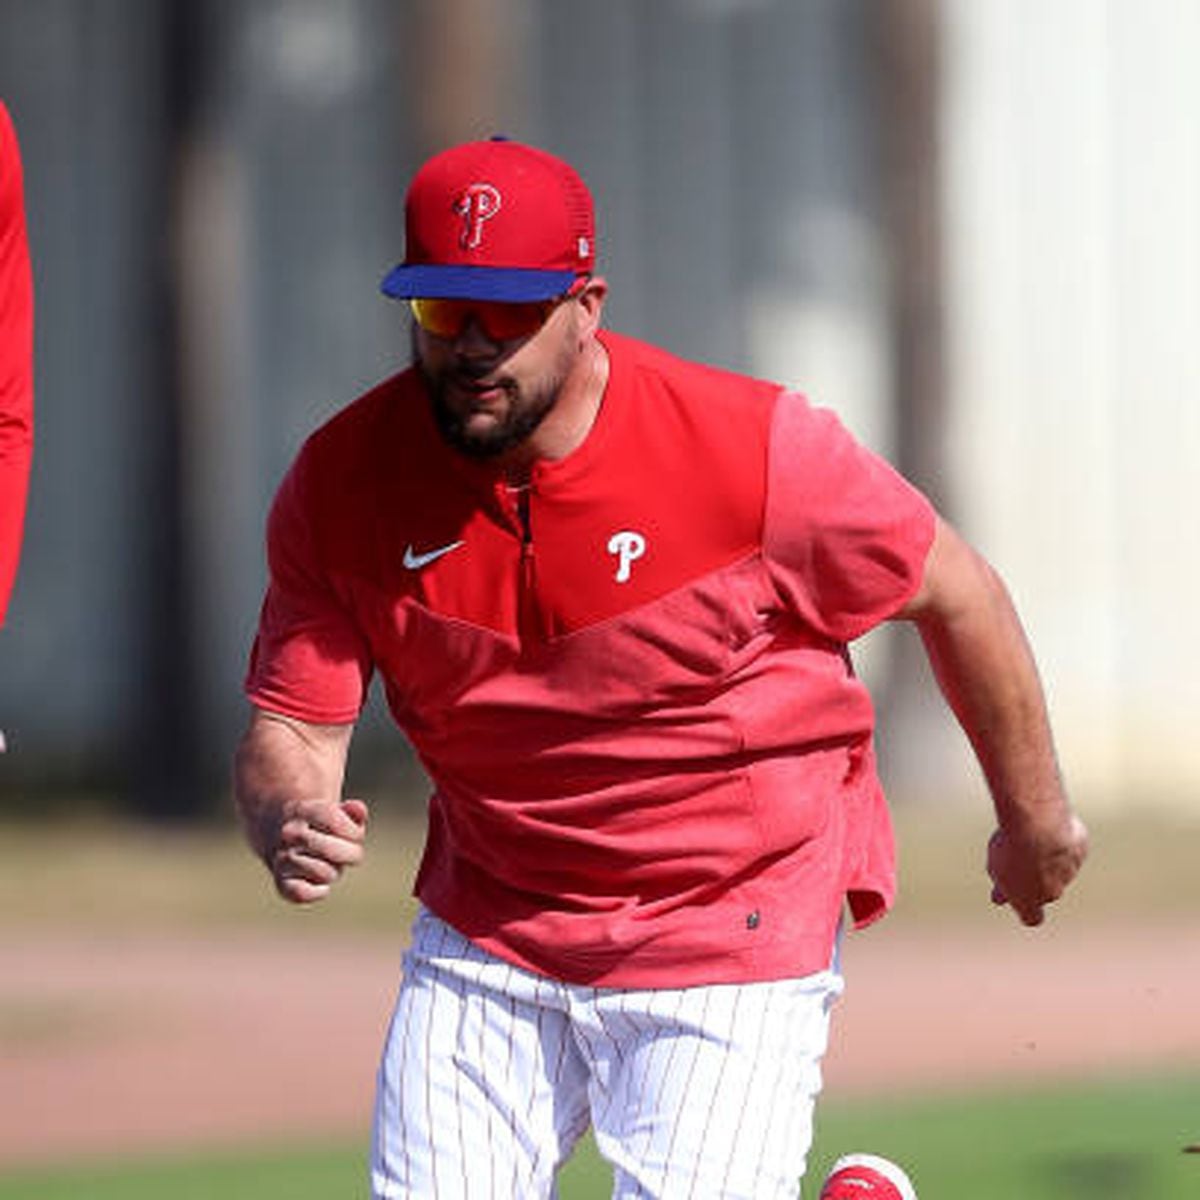 No defensive shifts could change everything for Kyle Schwarber